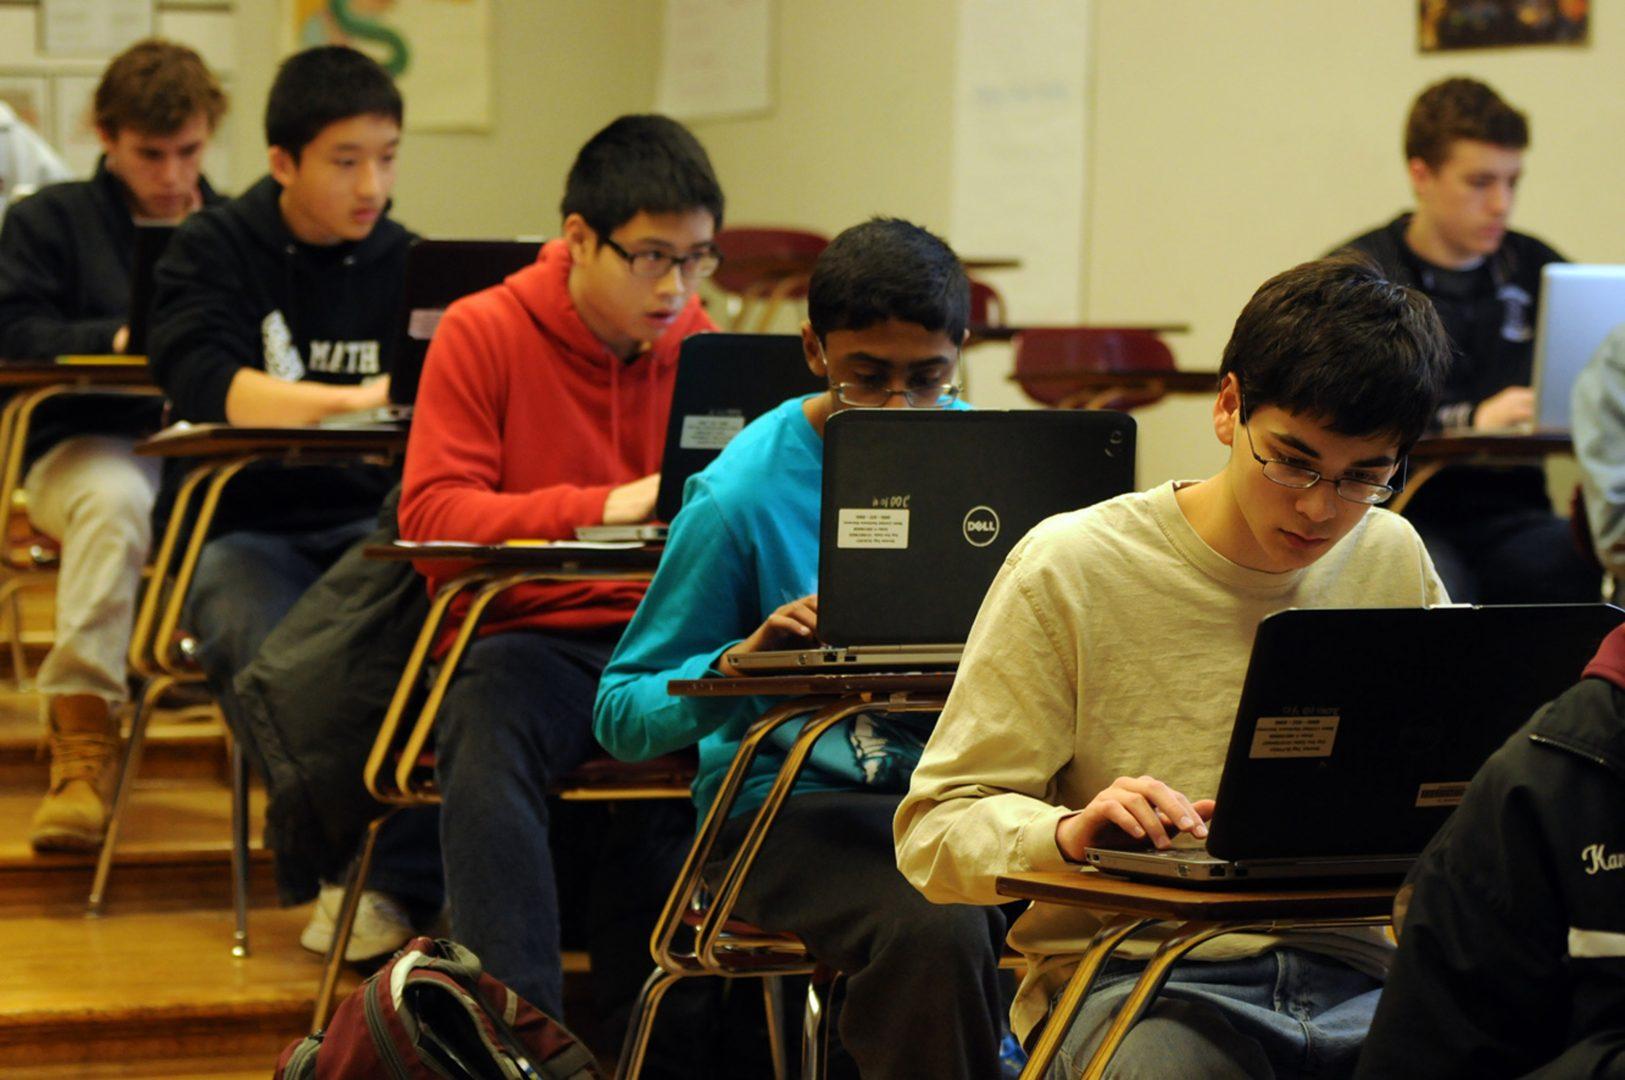 Students use laptops while taking a Latin honors exam at Ridgewood High School, January 25, 2013, in Ridgewood, New Jersey. (Tribune News Service)